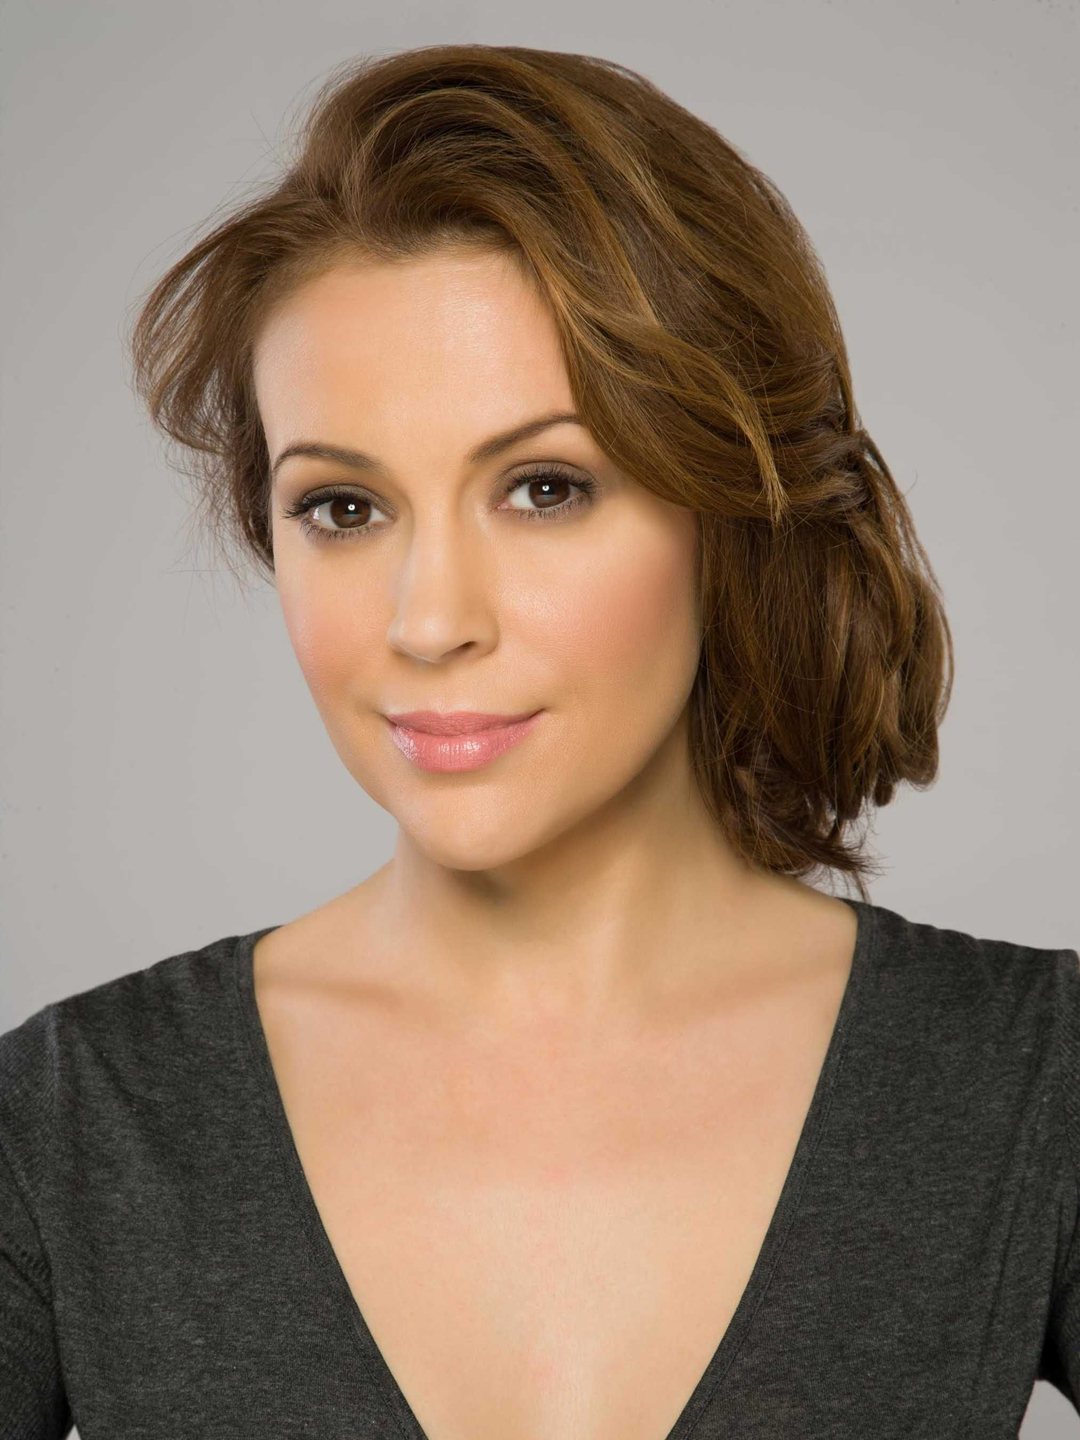 Alyssa Milano in her youth